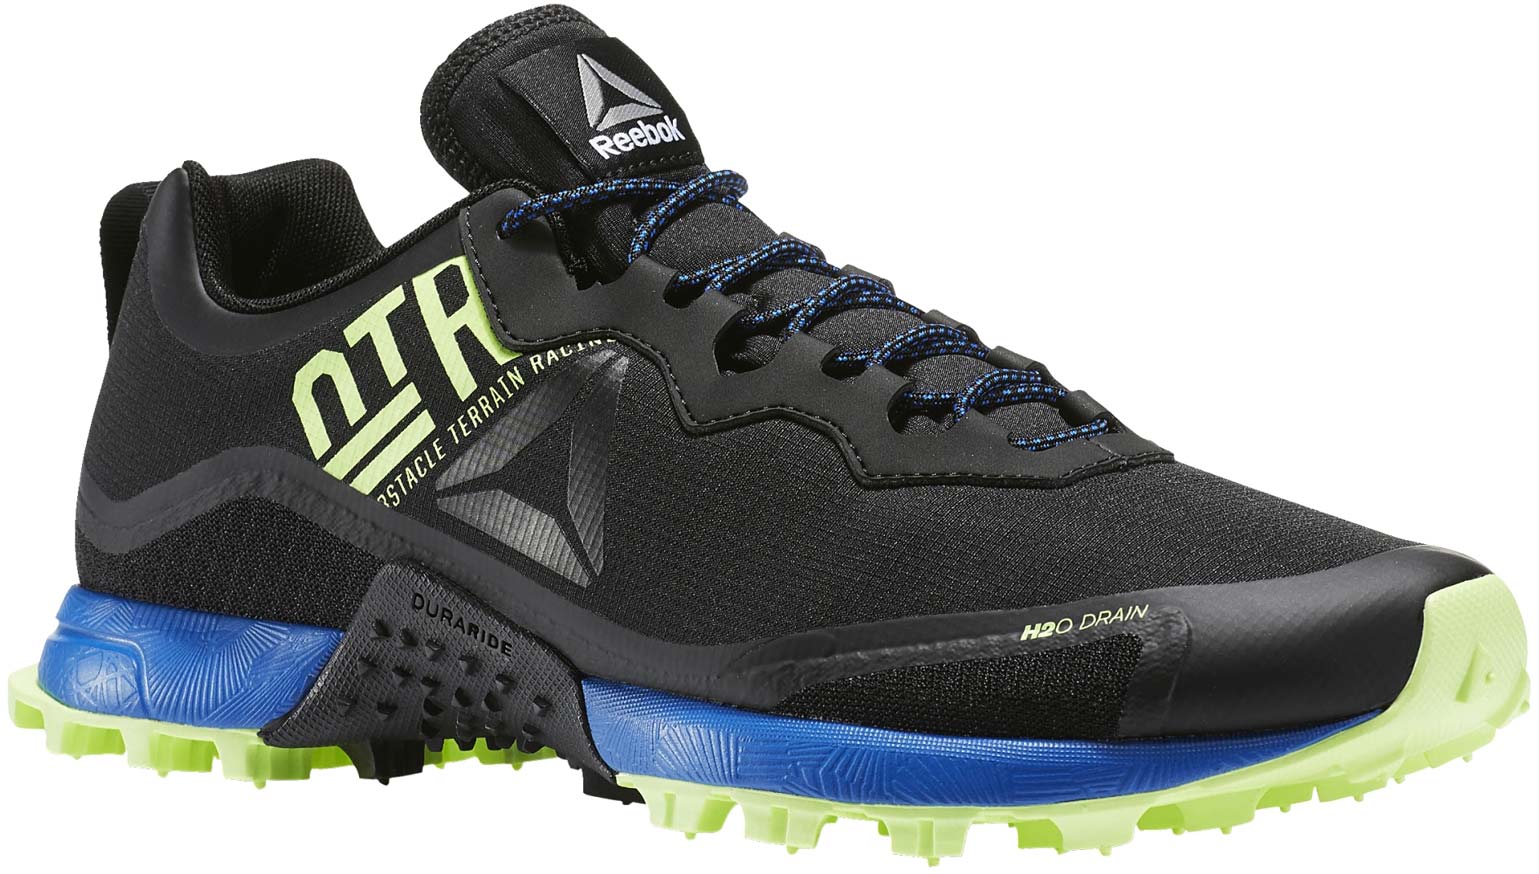 reebok all terrain craze bs 8644, OFF 71%,Free delivery!